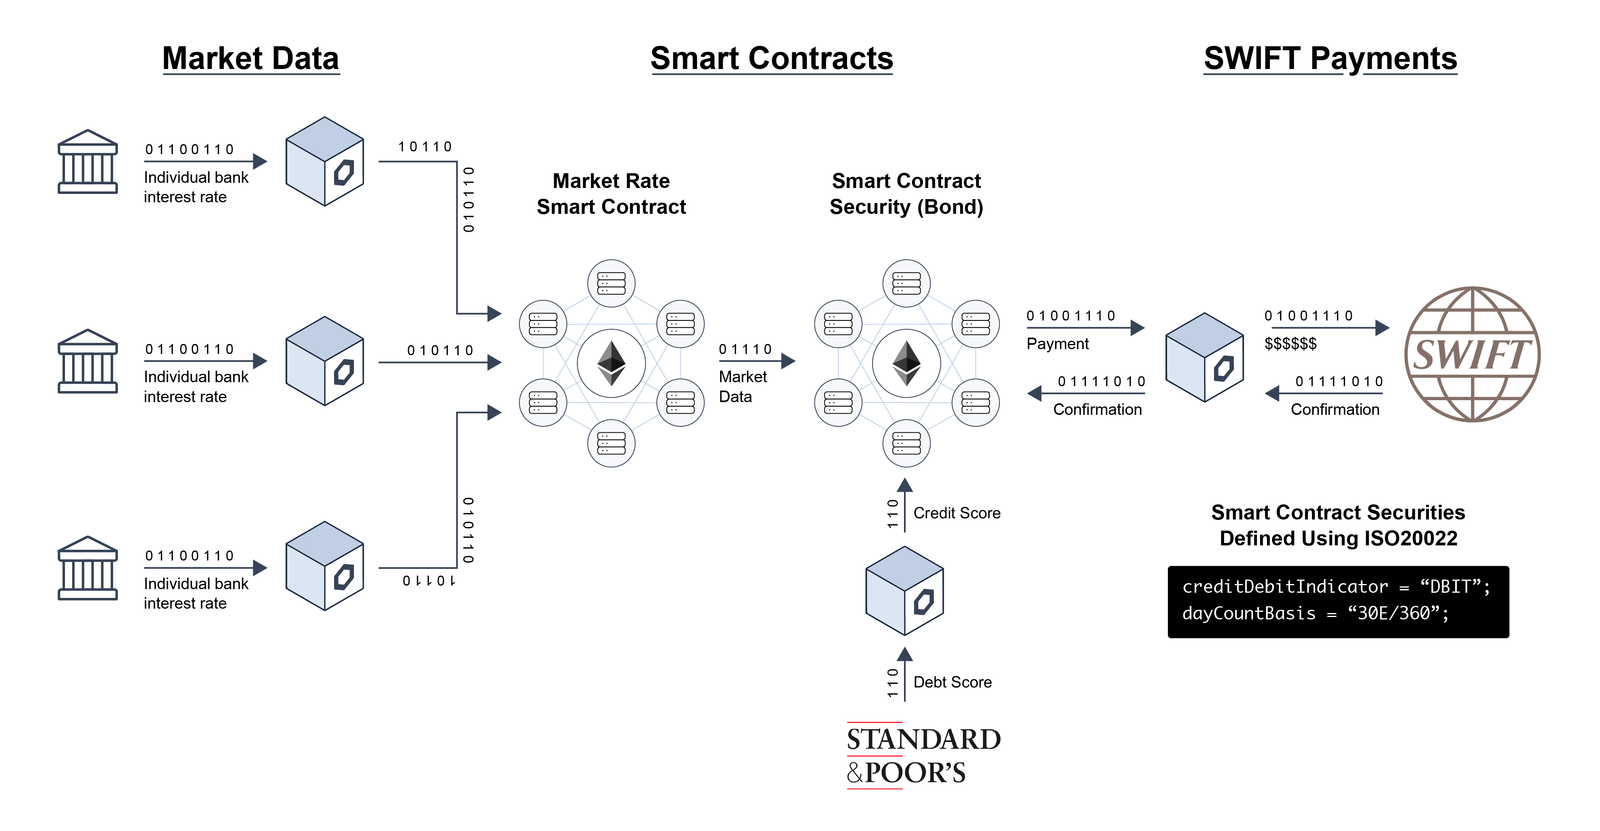 A smart contract bond using Chainlink oracles and SWIFT’s ISO20022 standard